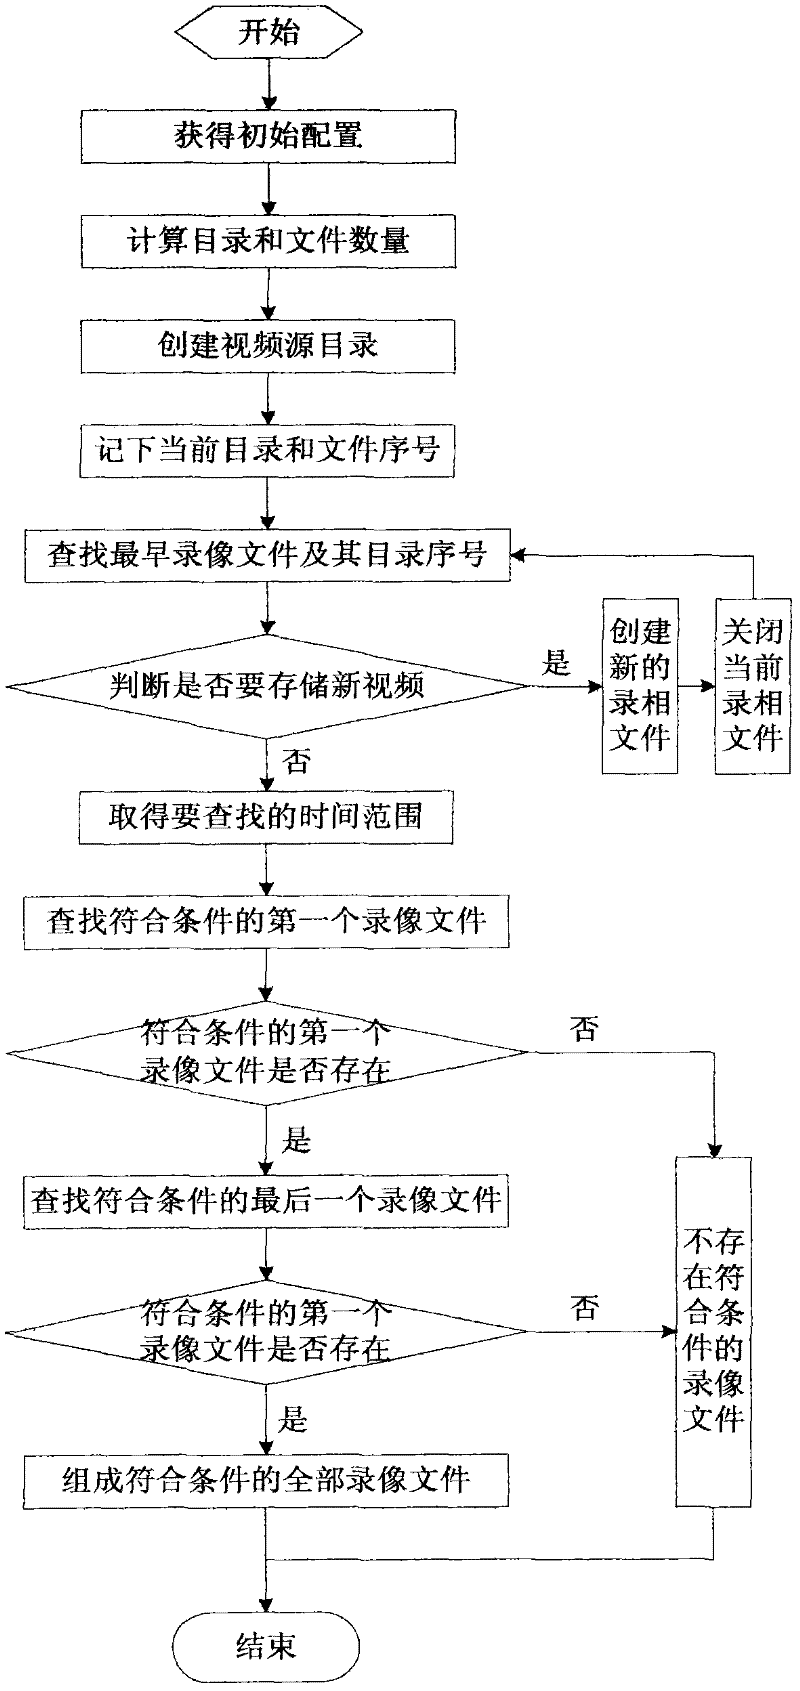 Storage organization and search method of digital video videotaping files